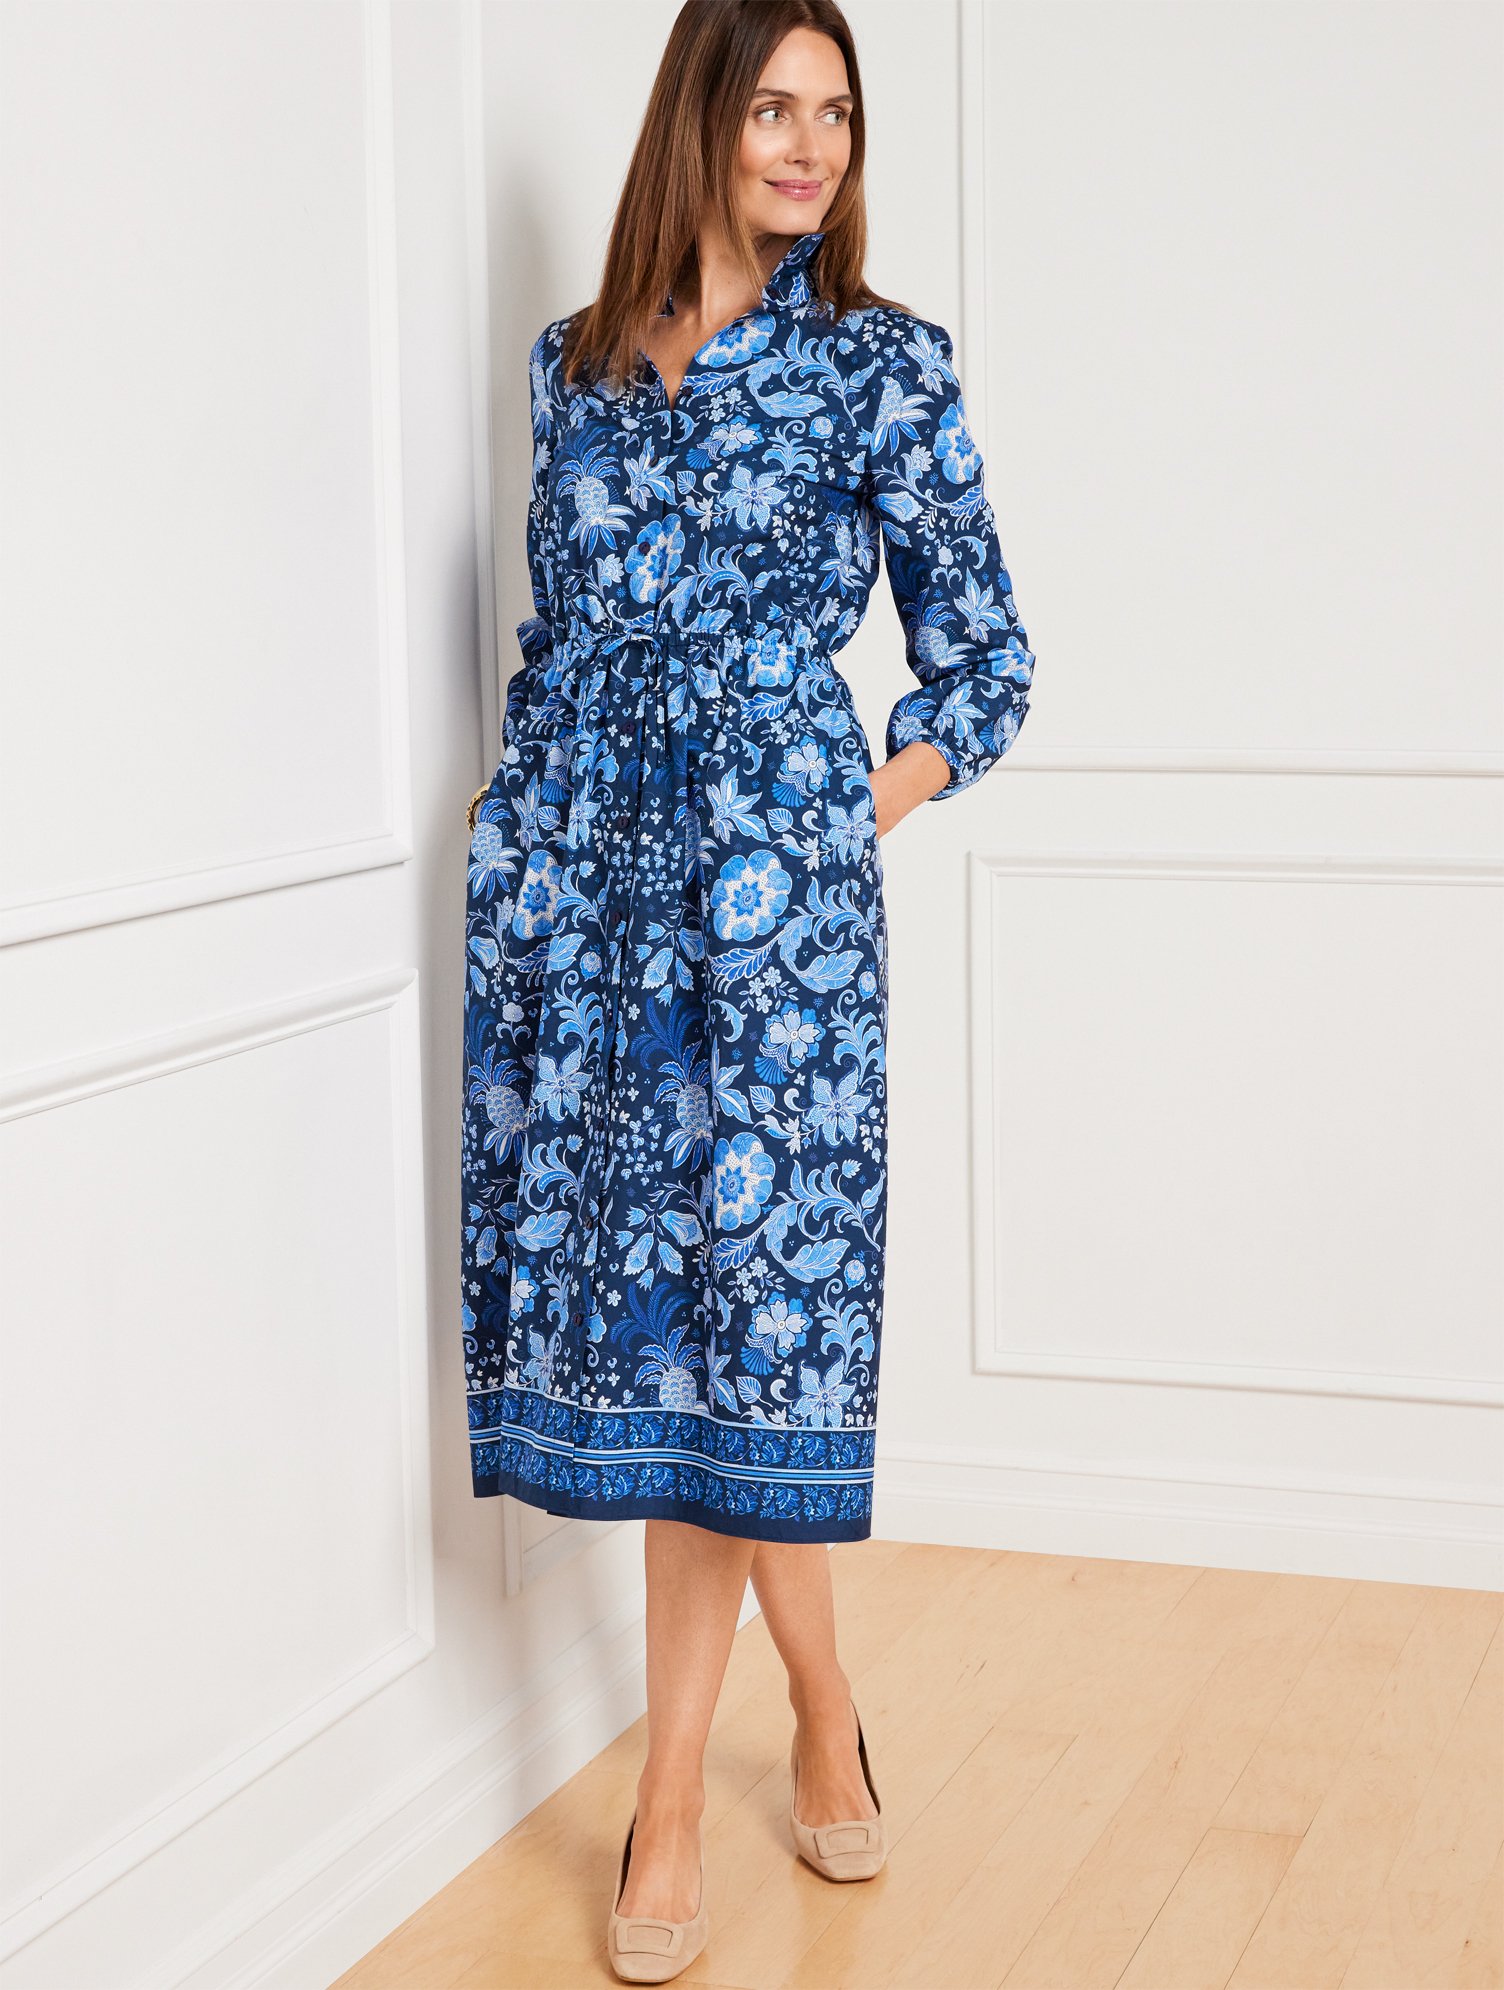 Talbots Petite - Tie Waist Shirtdress - Whimsical Floral - Ink/blue - 10 - 100% Cotton  In Ink,blue